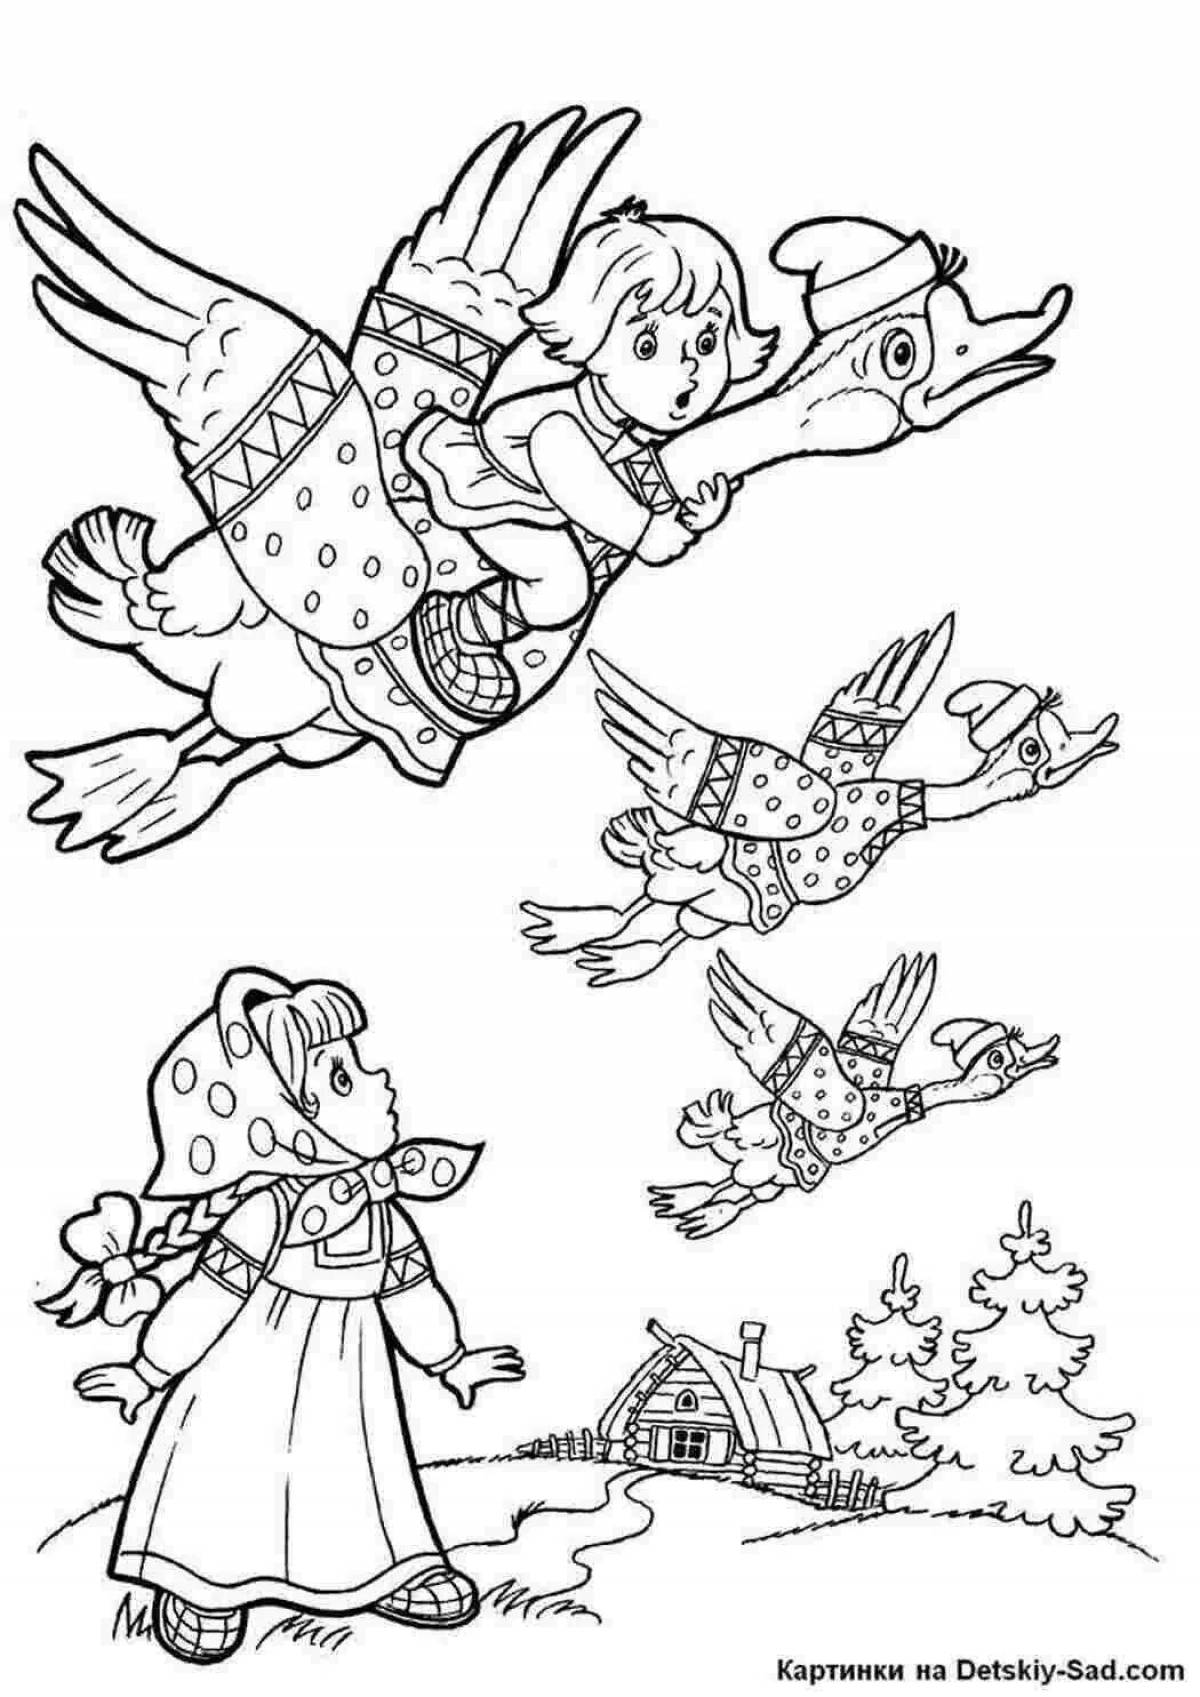 Exciting coloring Russian folk tales